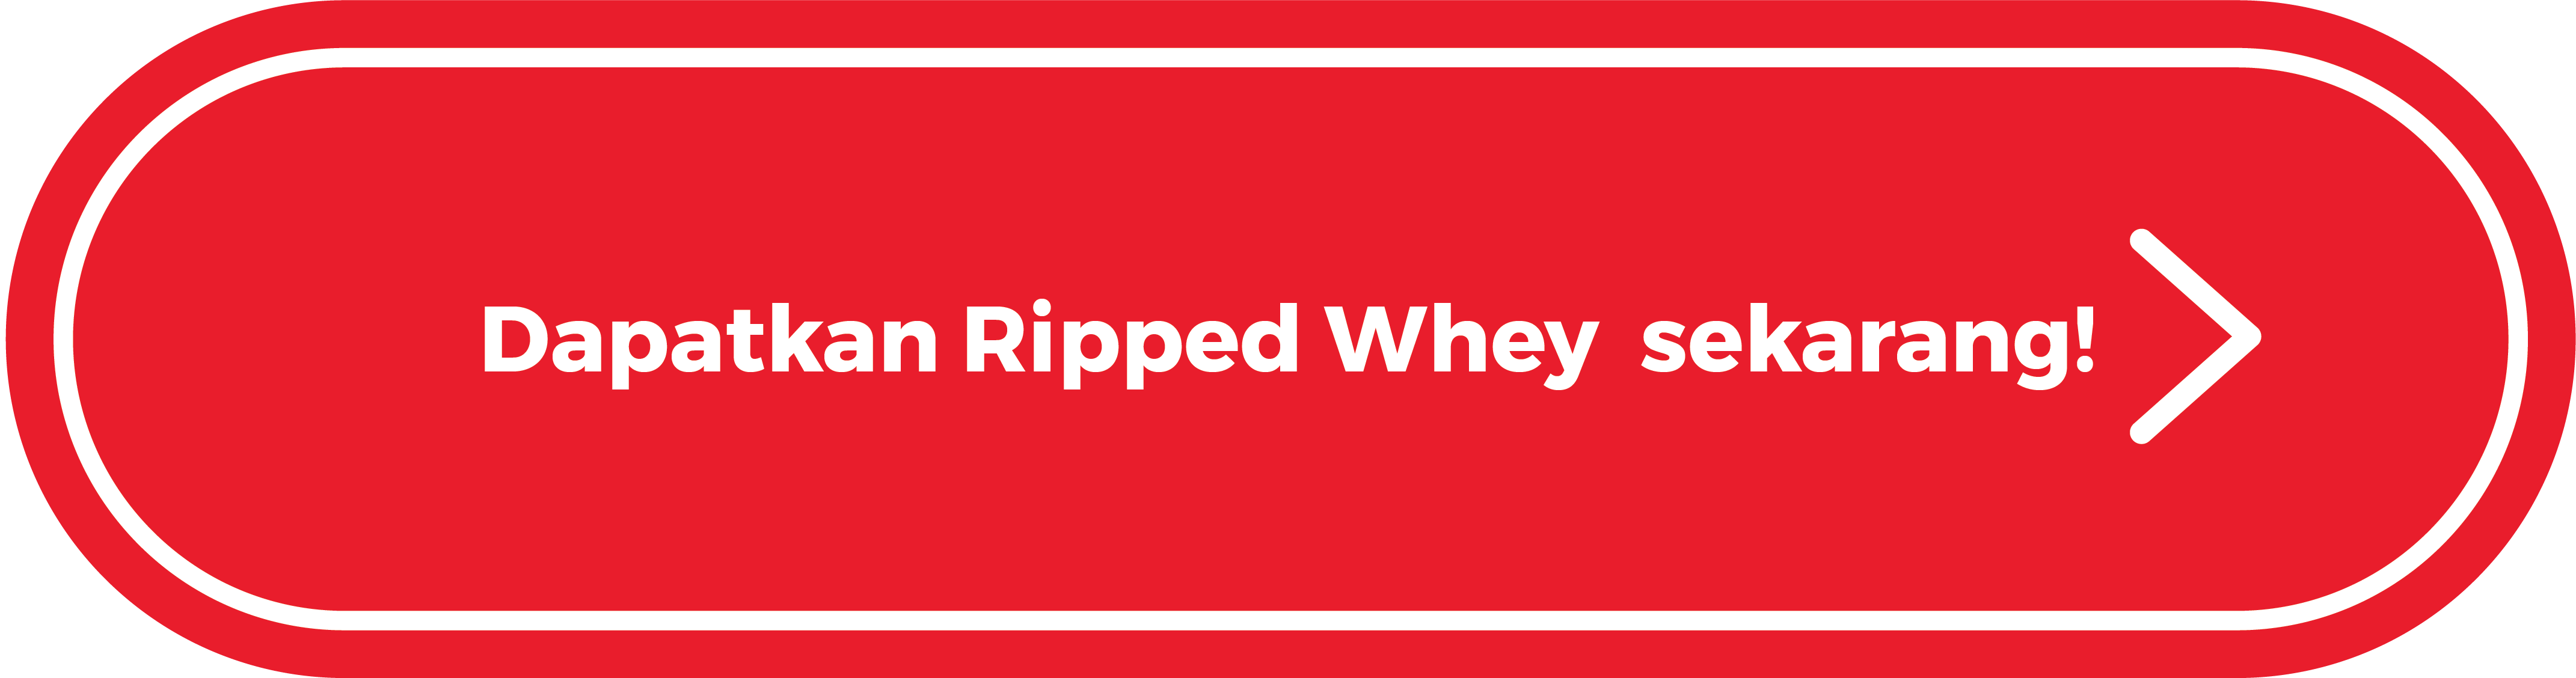 Landing page ripped whey 13-01